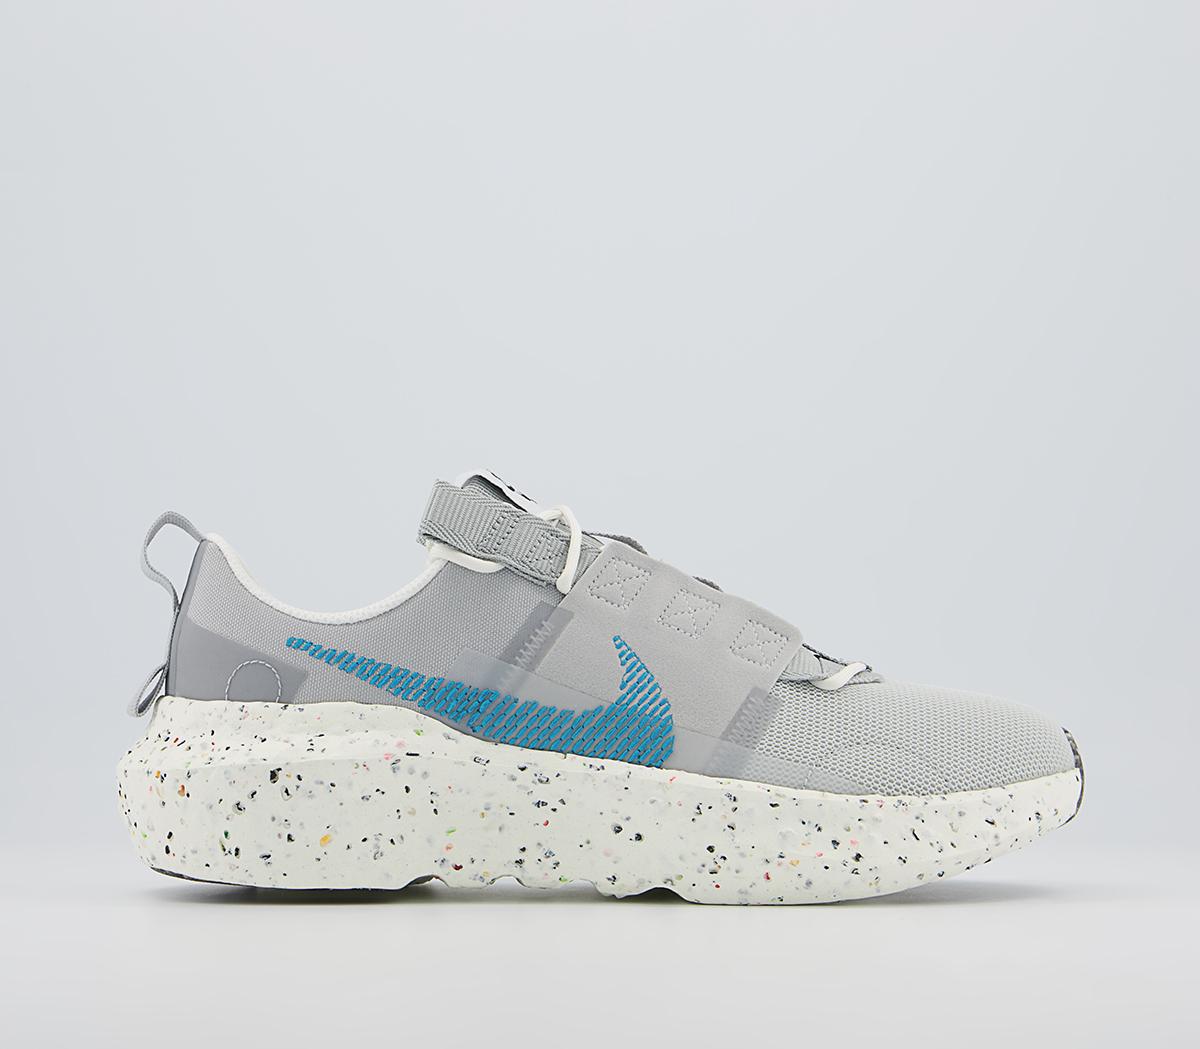 NikeCrater Impact Trainers MGrey Fog Cyber Teal Smoke Grey Sail